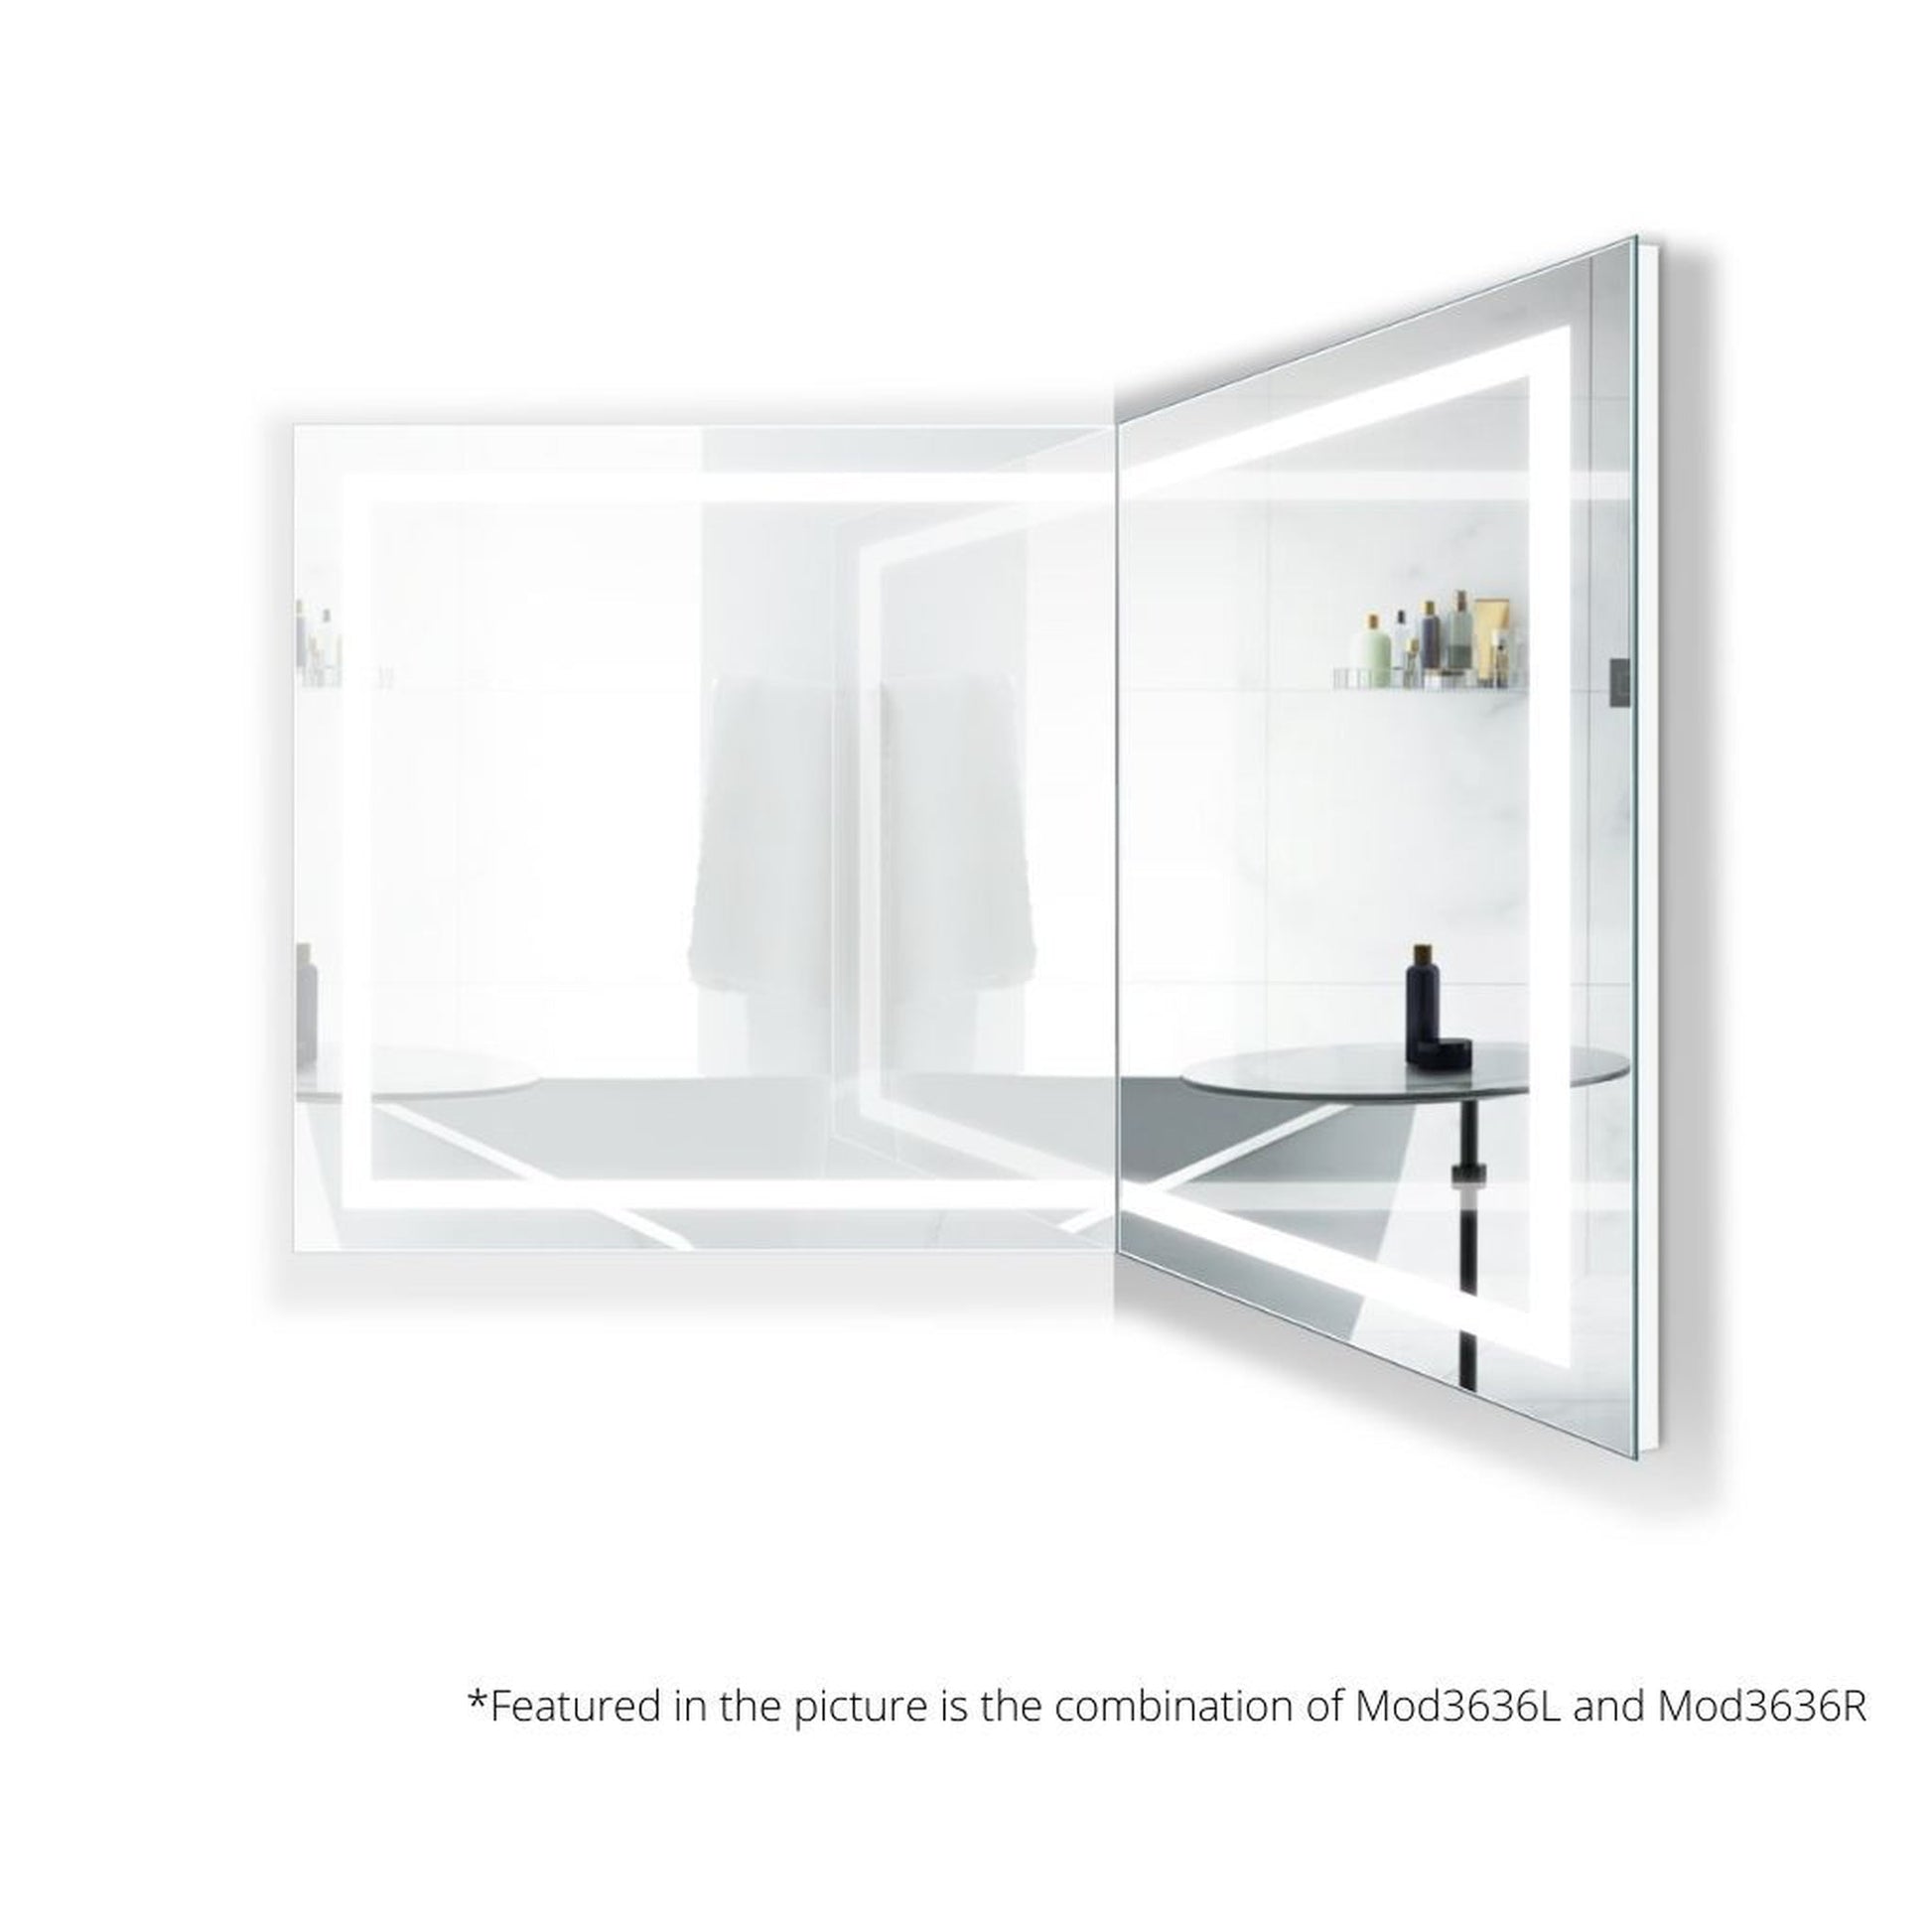 Krugg Reflections Mod 36" x 36" 5000K Square Right Configuration Wall-Mounted Silver-Backed LED Bathroom Vanity Mirror With Built-in Defogger and Dimmer